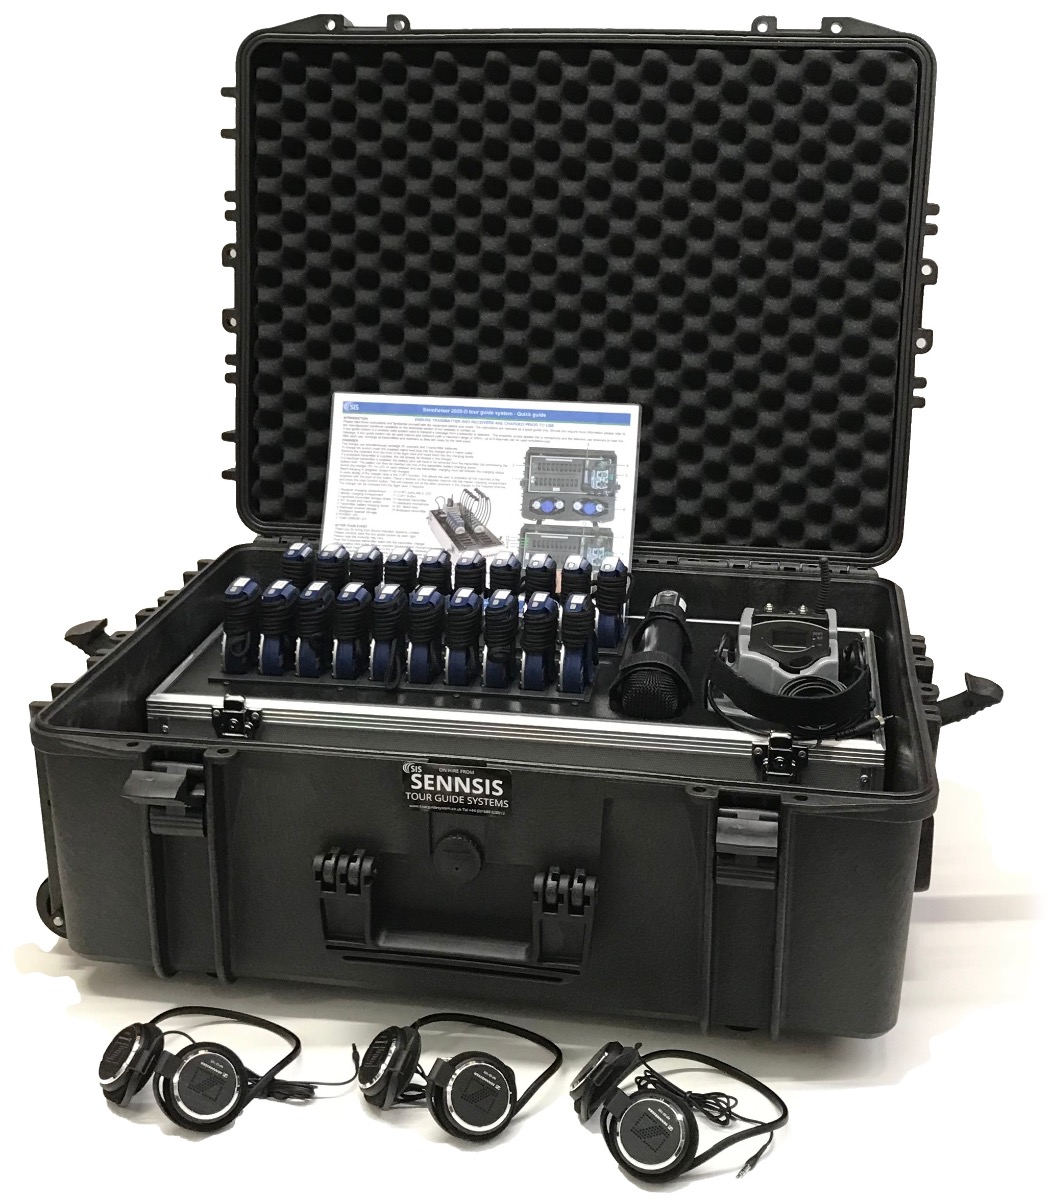 Sennheiser 2020-D tour guide system for hire with bodypack receivers and neckband headphones